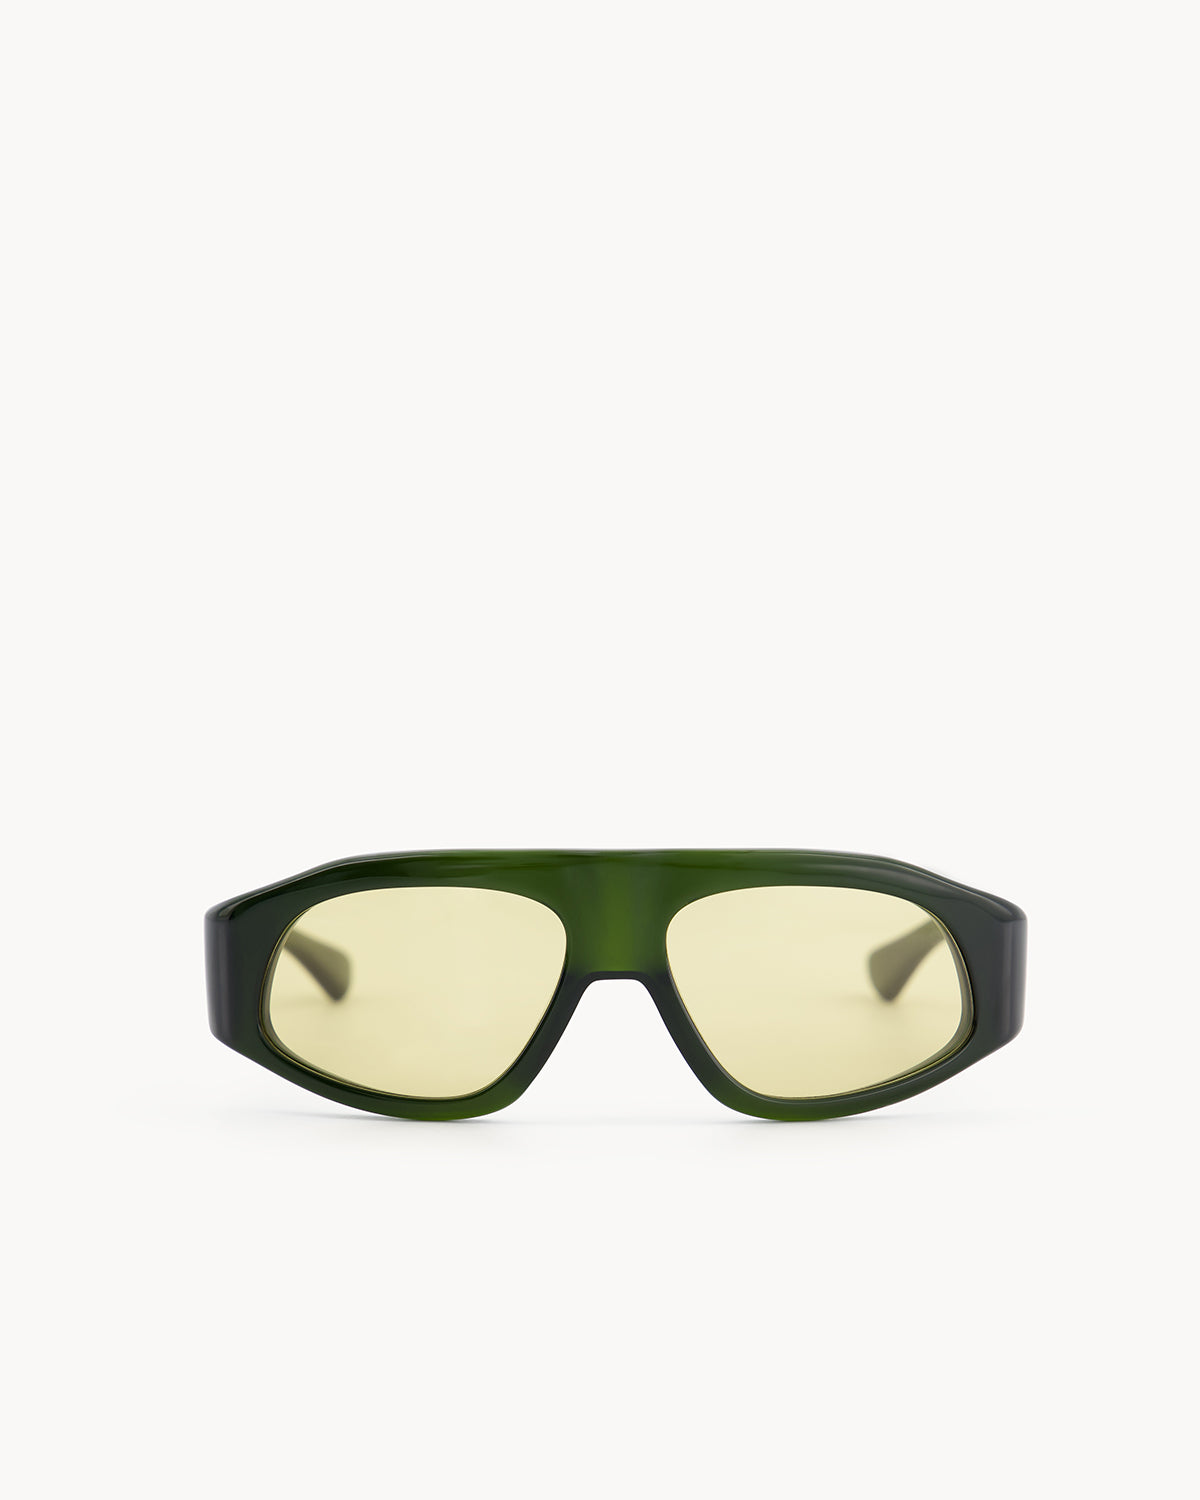 Port Tanger Irfan Sunglasses in Cardamom Acetate and Warm Olive Lenses 1